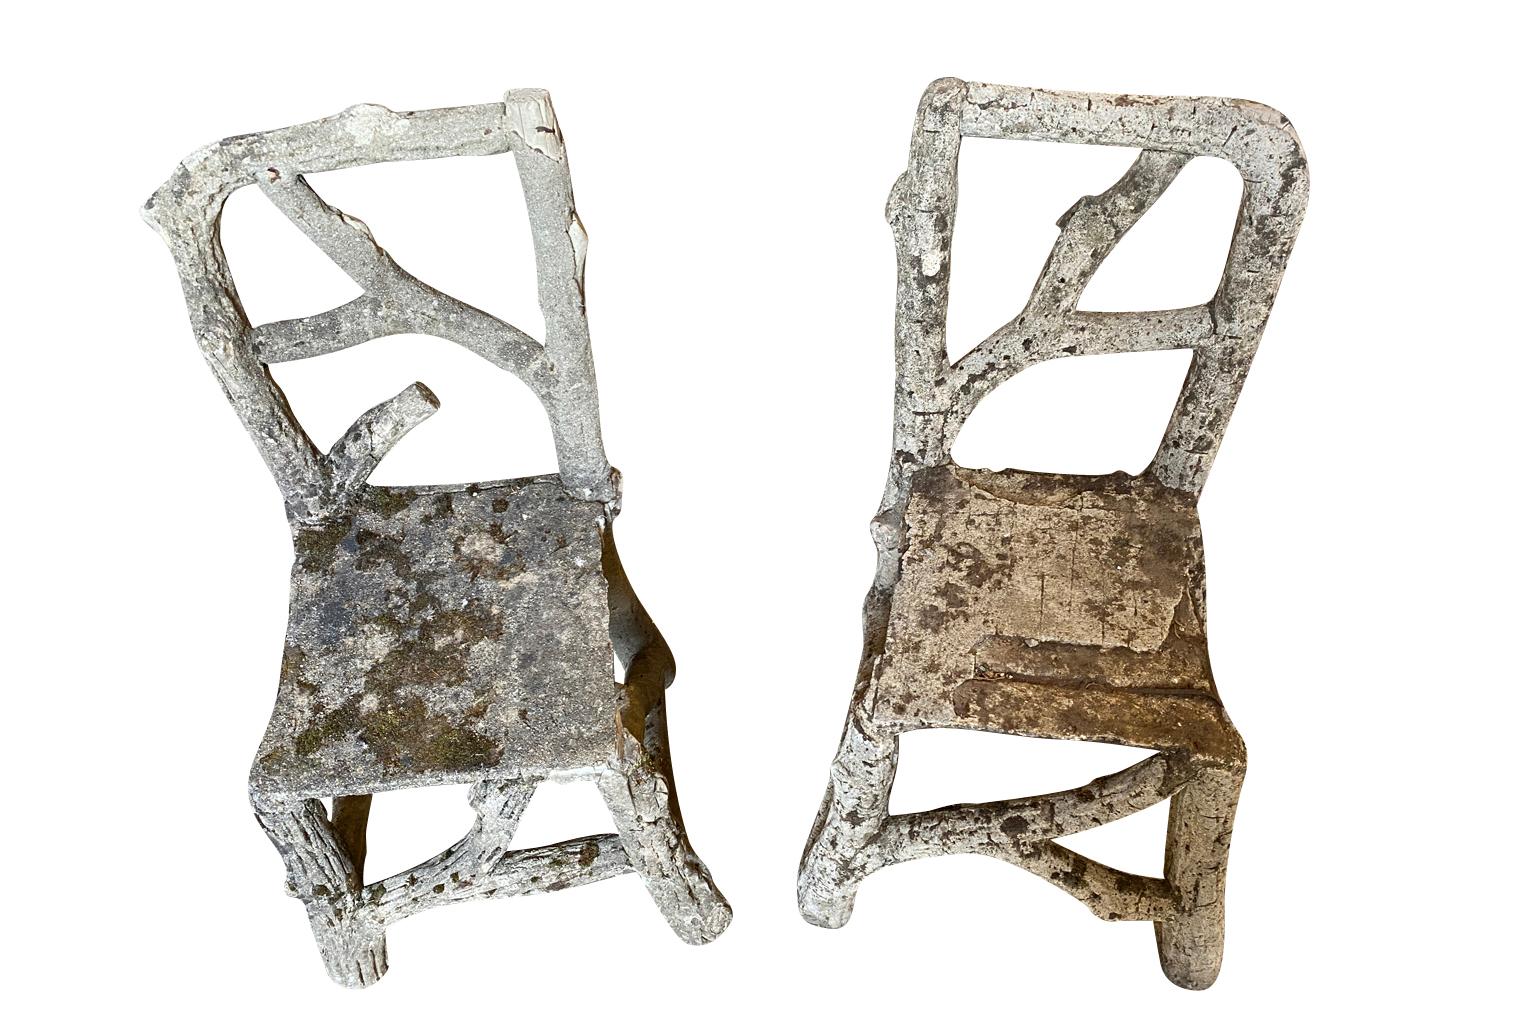 A wonderful pair of late 19th century Faux bois garden chairs - side chairs from the Provence region of France. Beautifully crafted from concrete. Fabulous patina. The seat height is 16 3/4